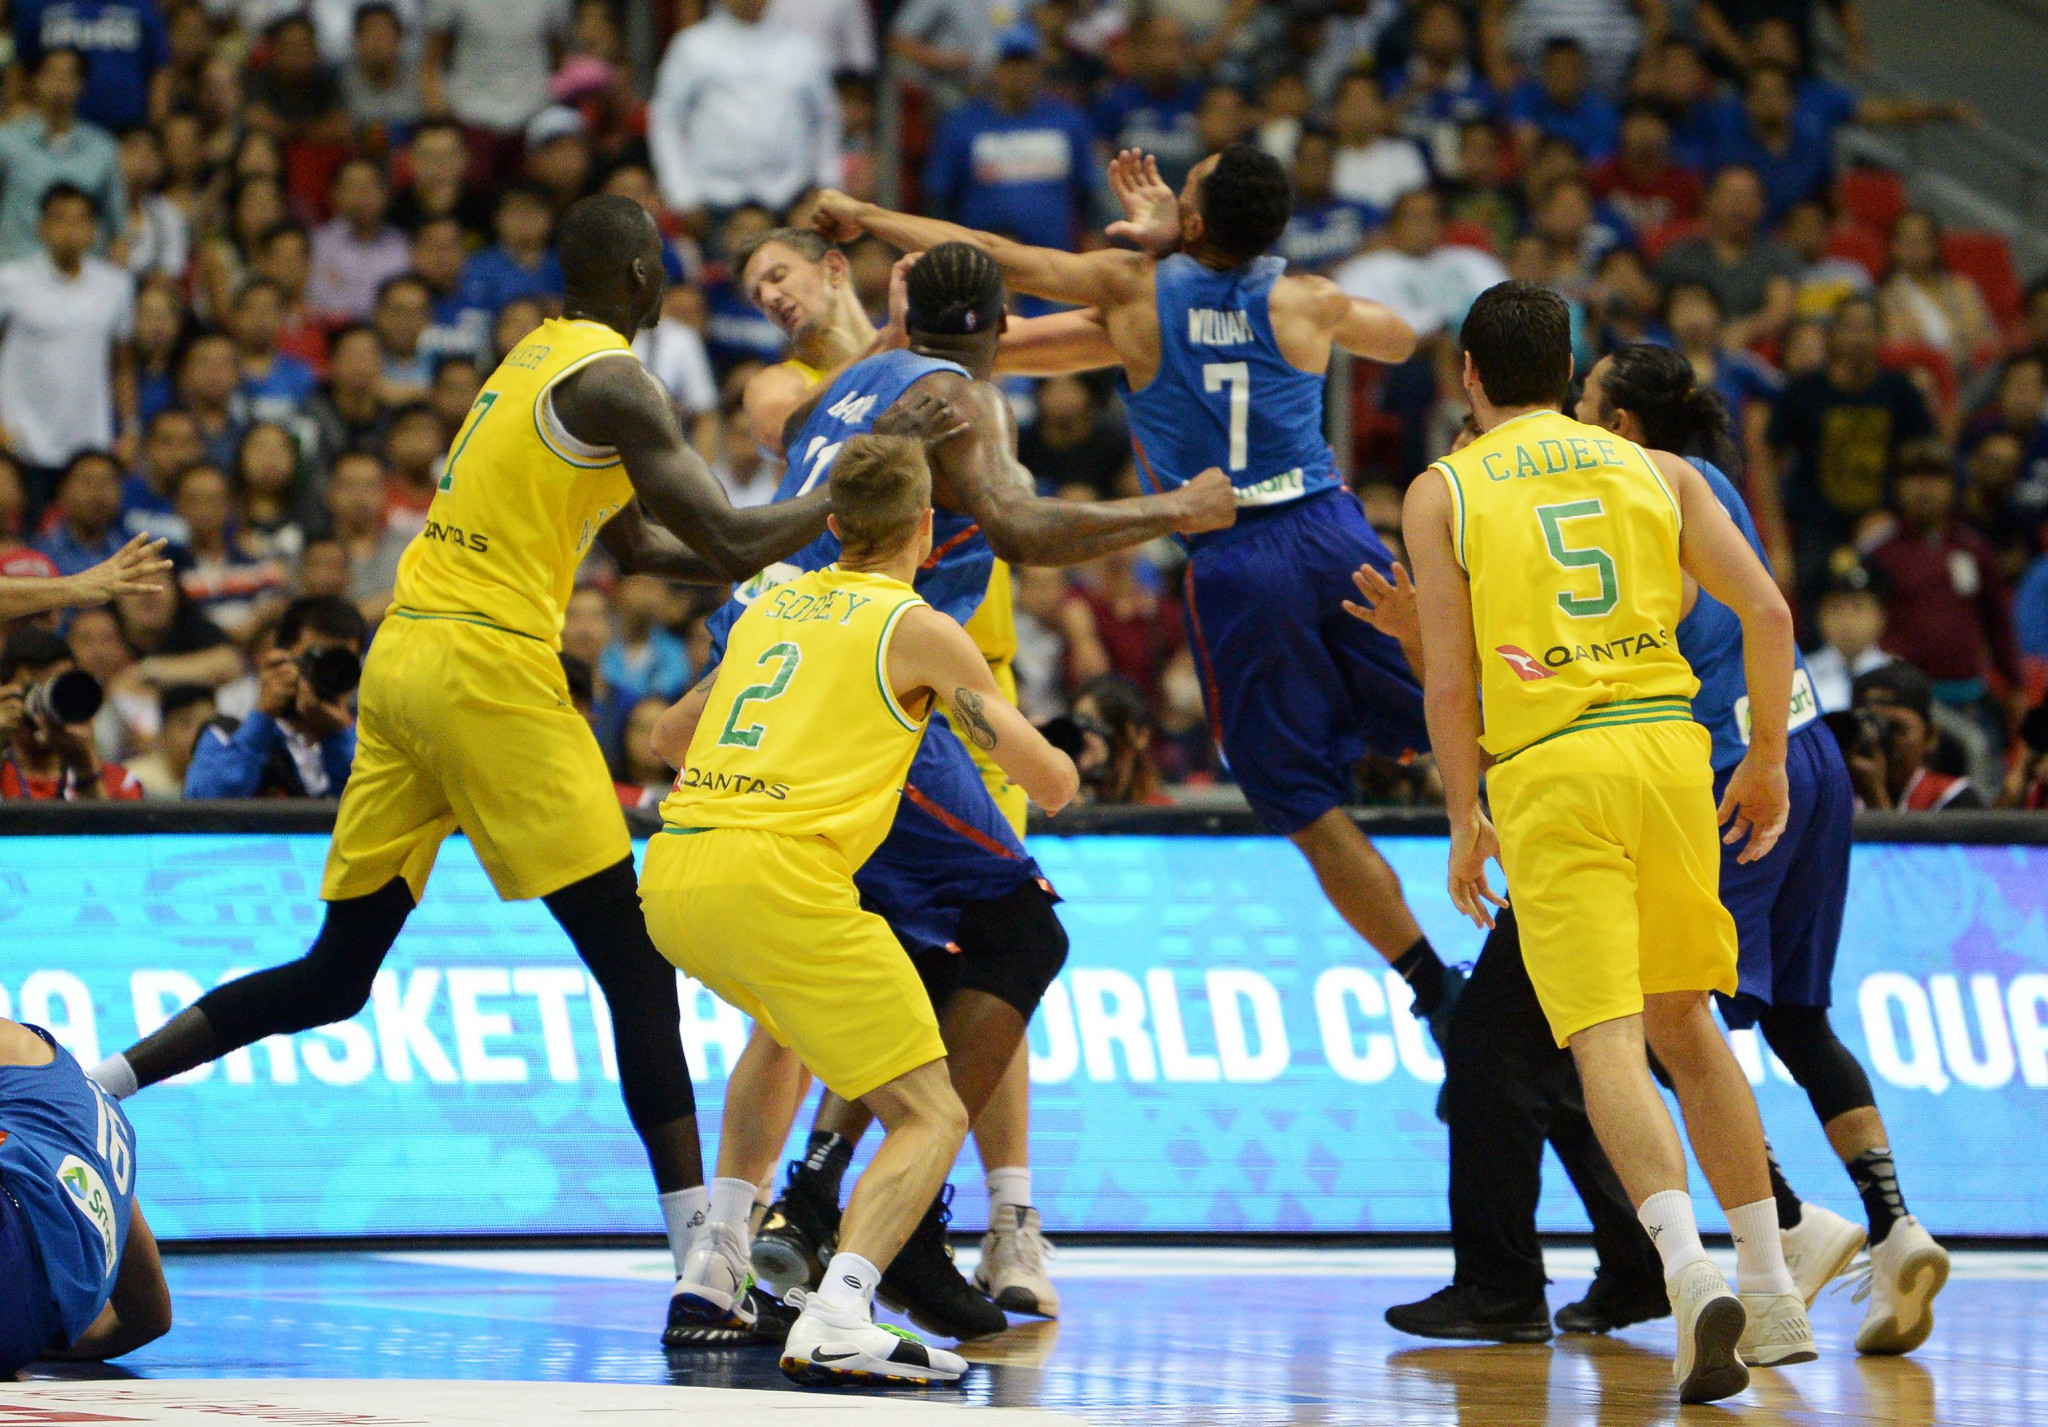 FIBA World Cup qualifier ends in disgrace as Philippines and Australia players brawl on court